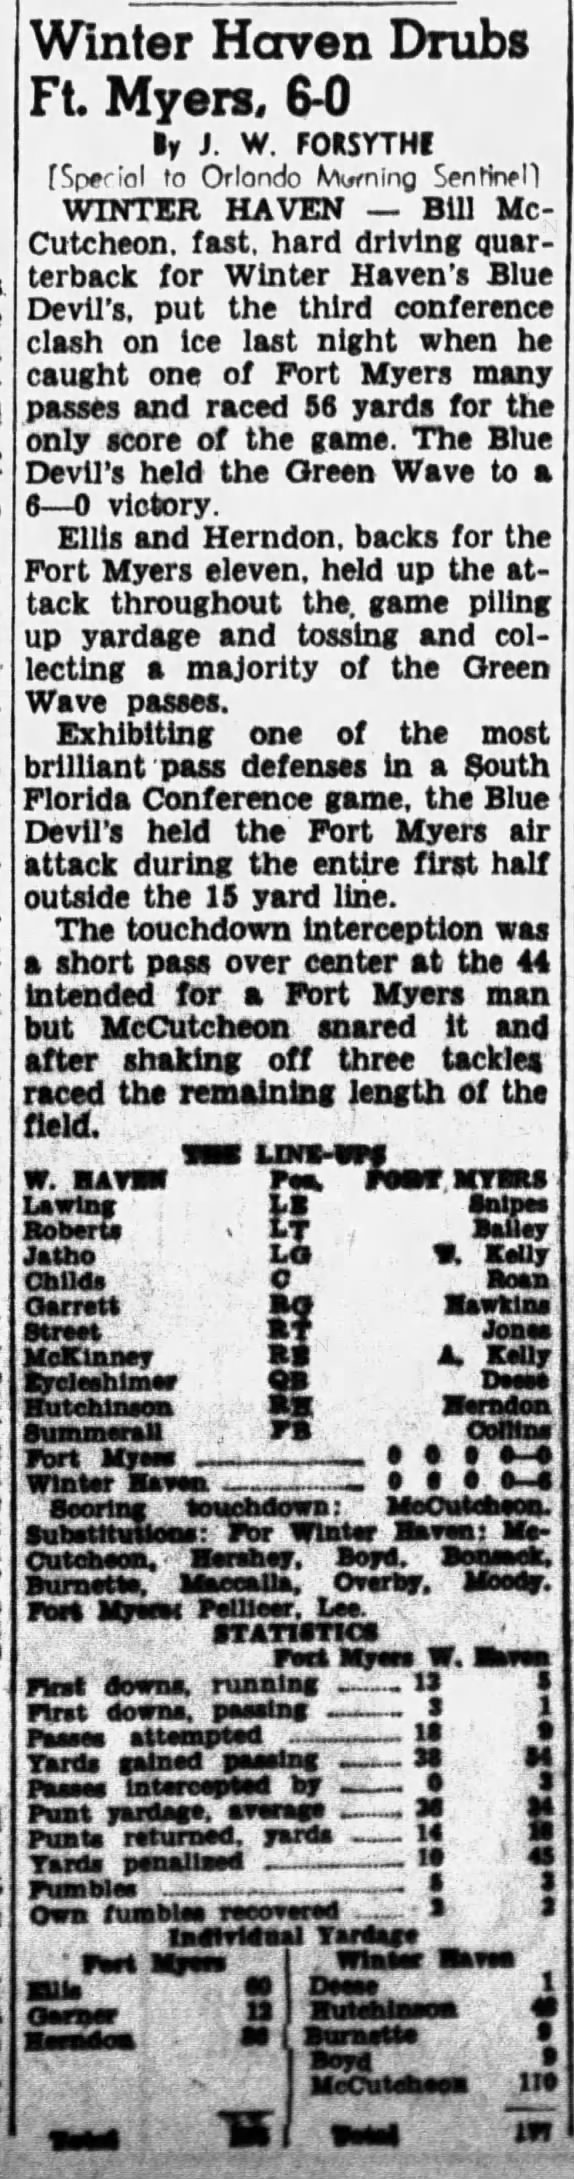 1941 Oct 25 - McCUTCHEON, Bill - Winter Haven High School football, the only score of the night